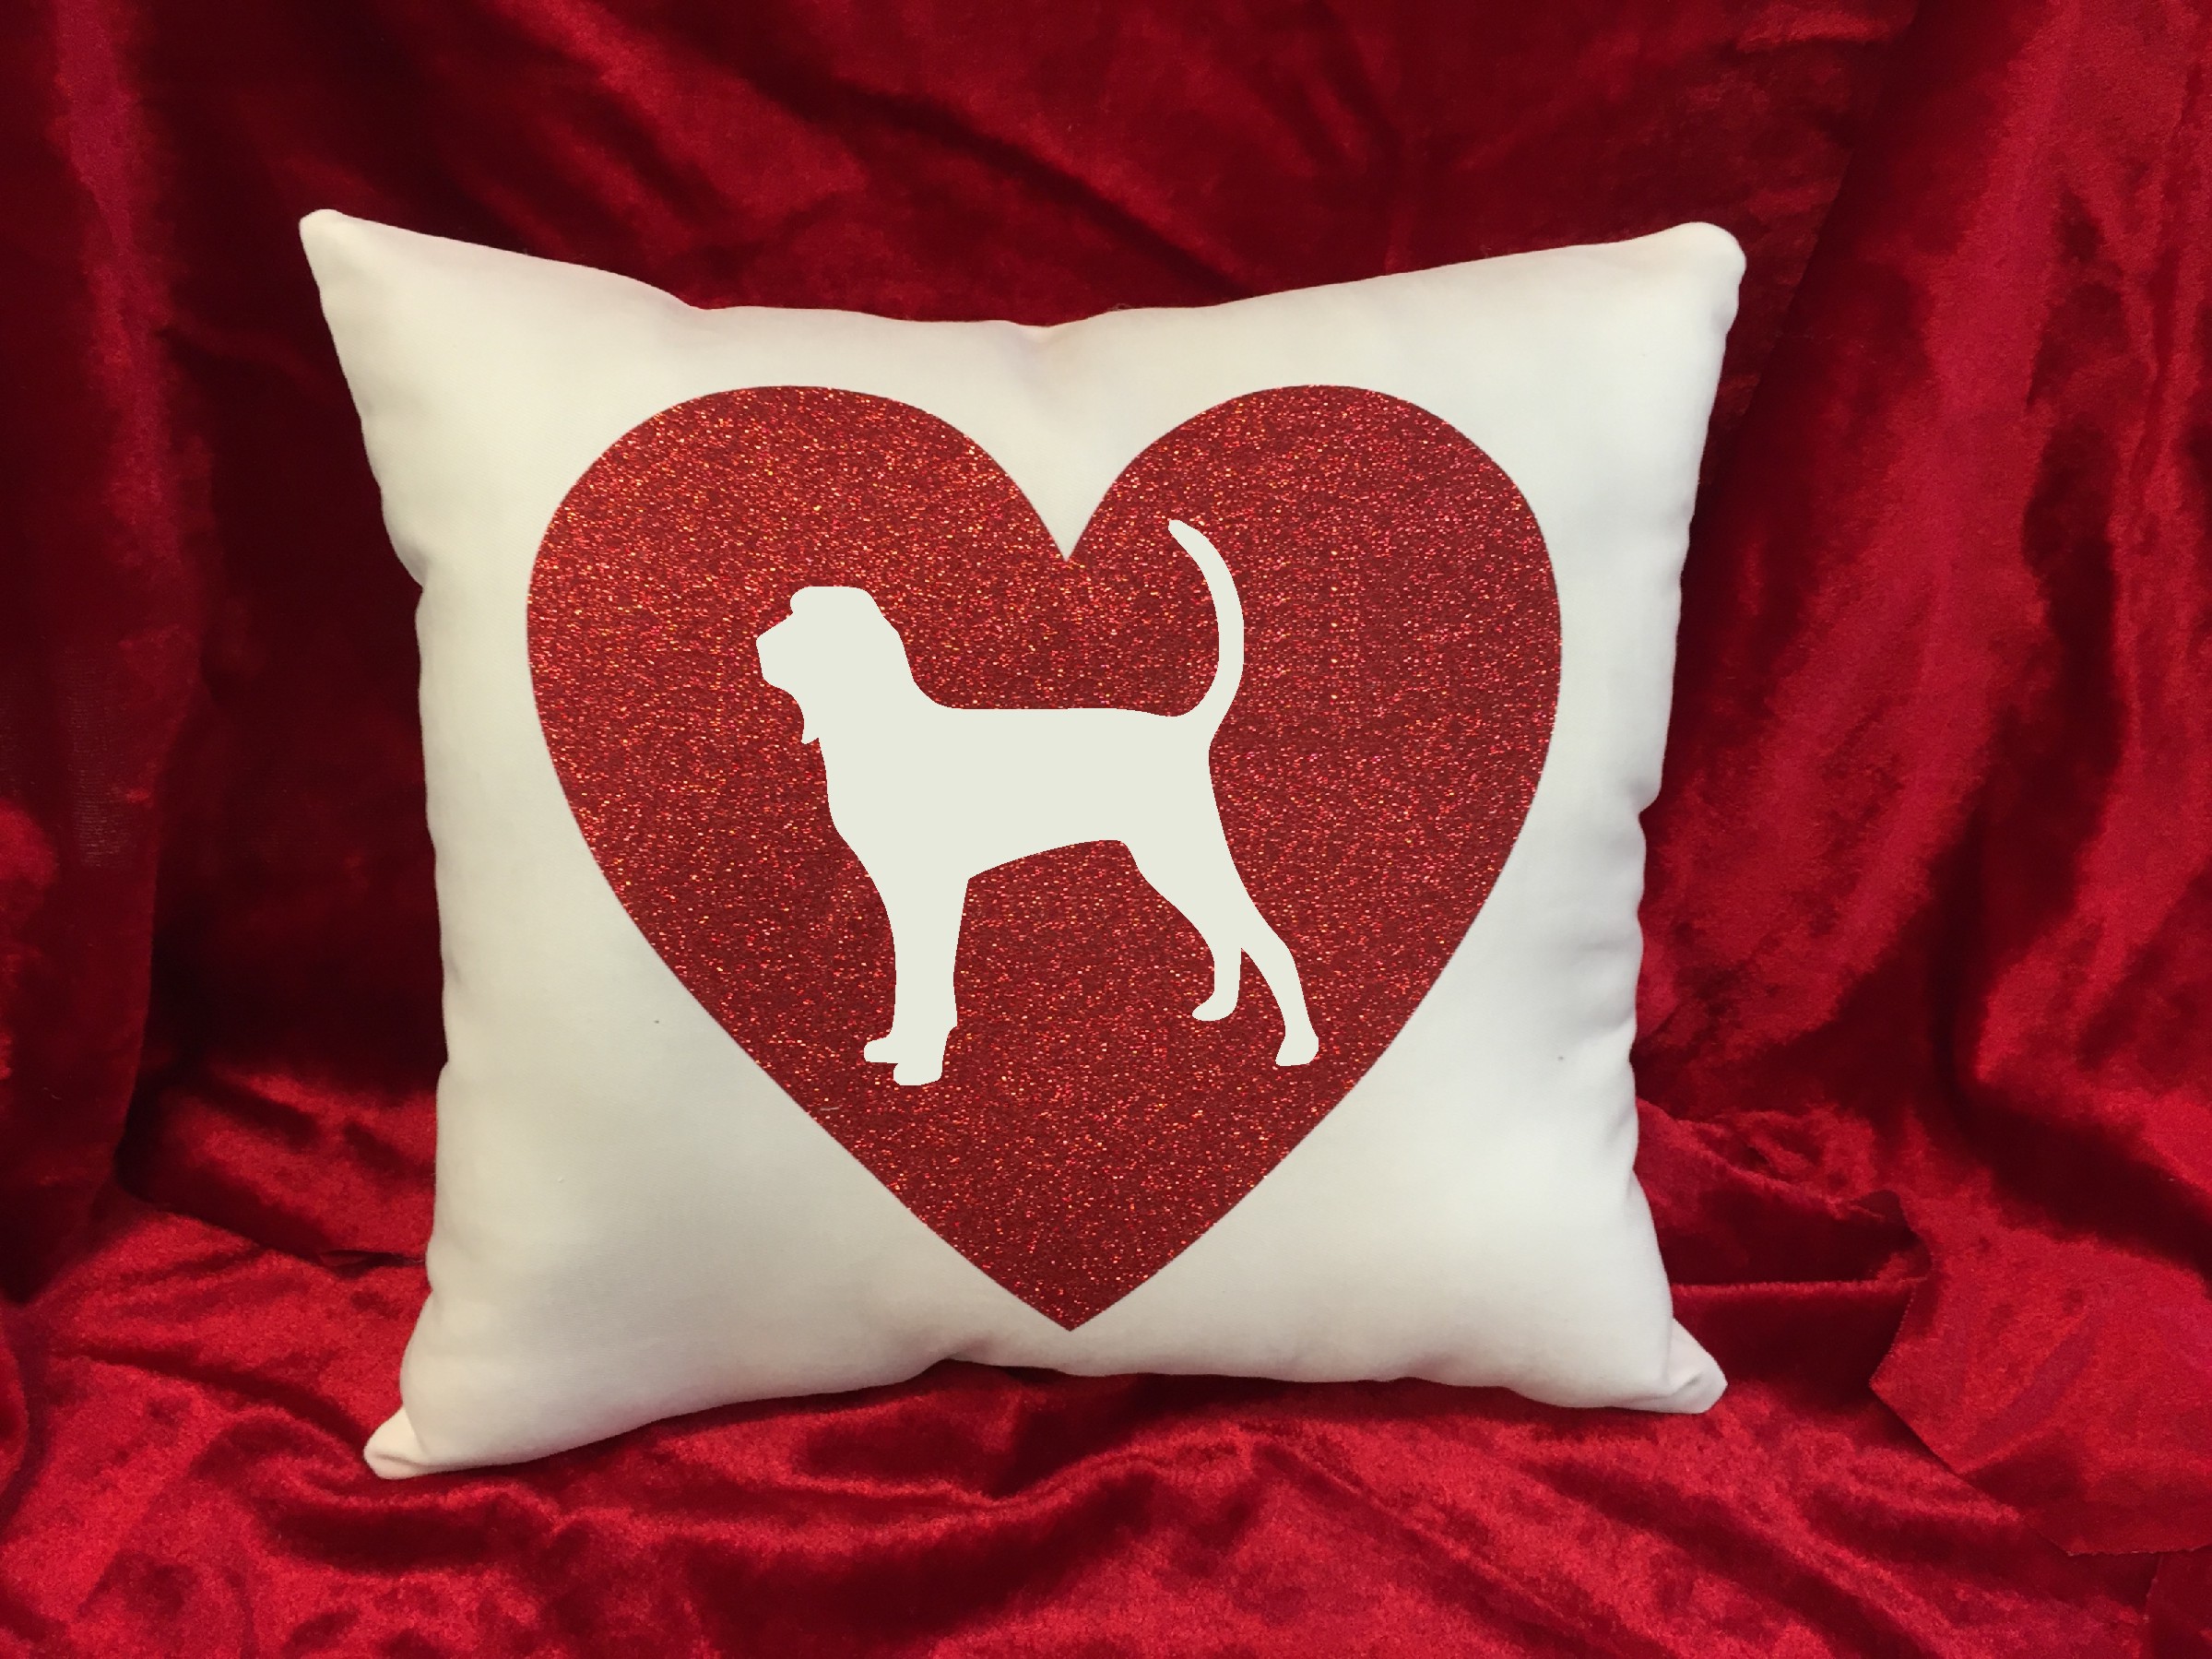 Dogs - Throw Pillow - Black and Tan Coonhound